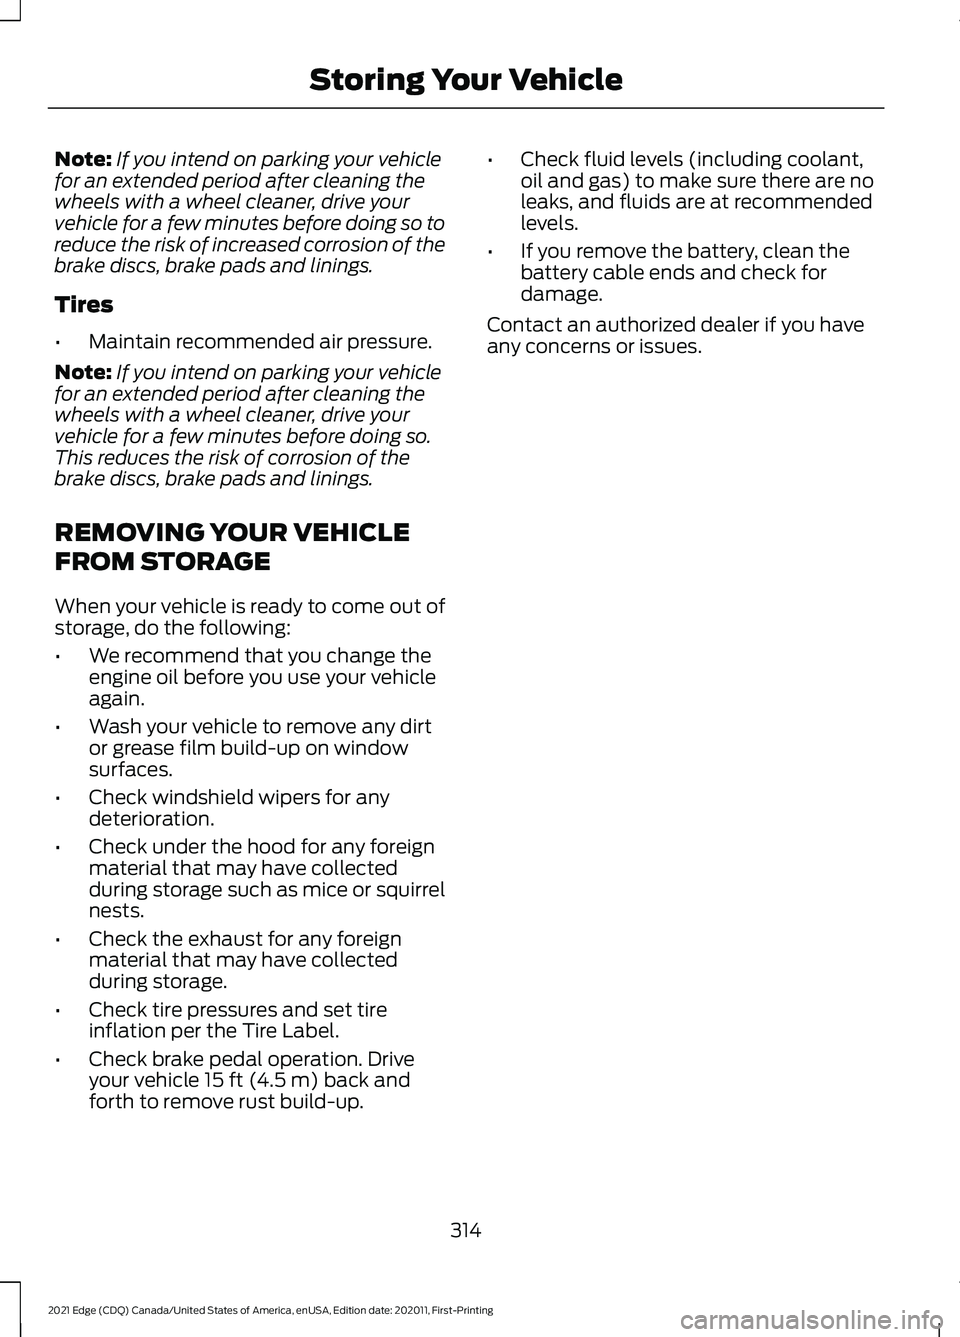 FORD EDGE 2021  Owners Manual Note:
If you intend on parking your vehicle
for an extended period after cleaning the
wheels with a wheel cleaner, drive your
vehicle for a few minutes before doing so to
reduce the risk of increased 